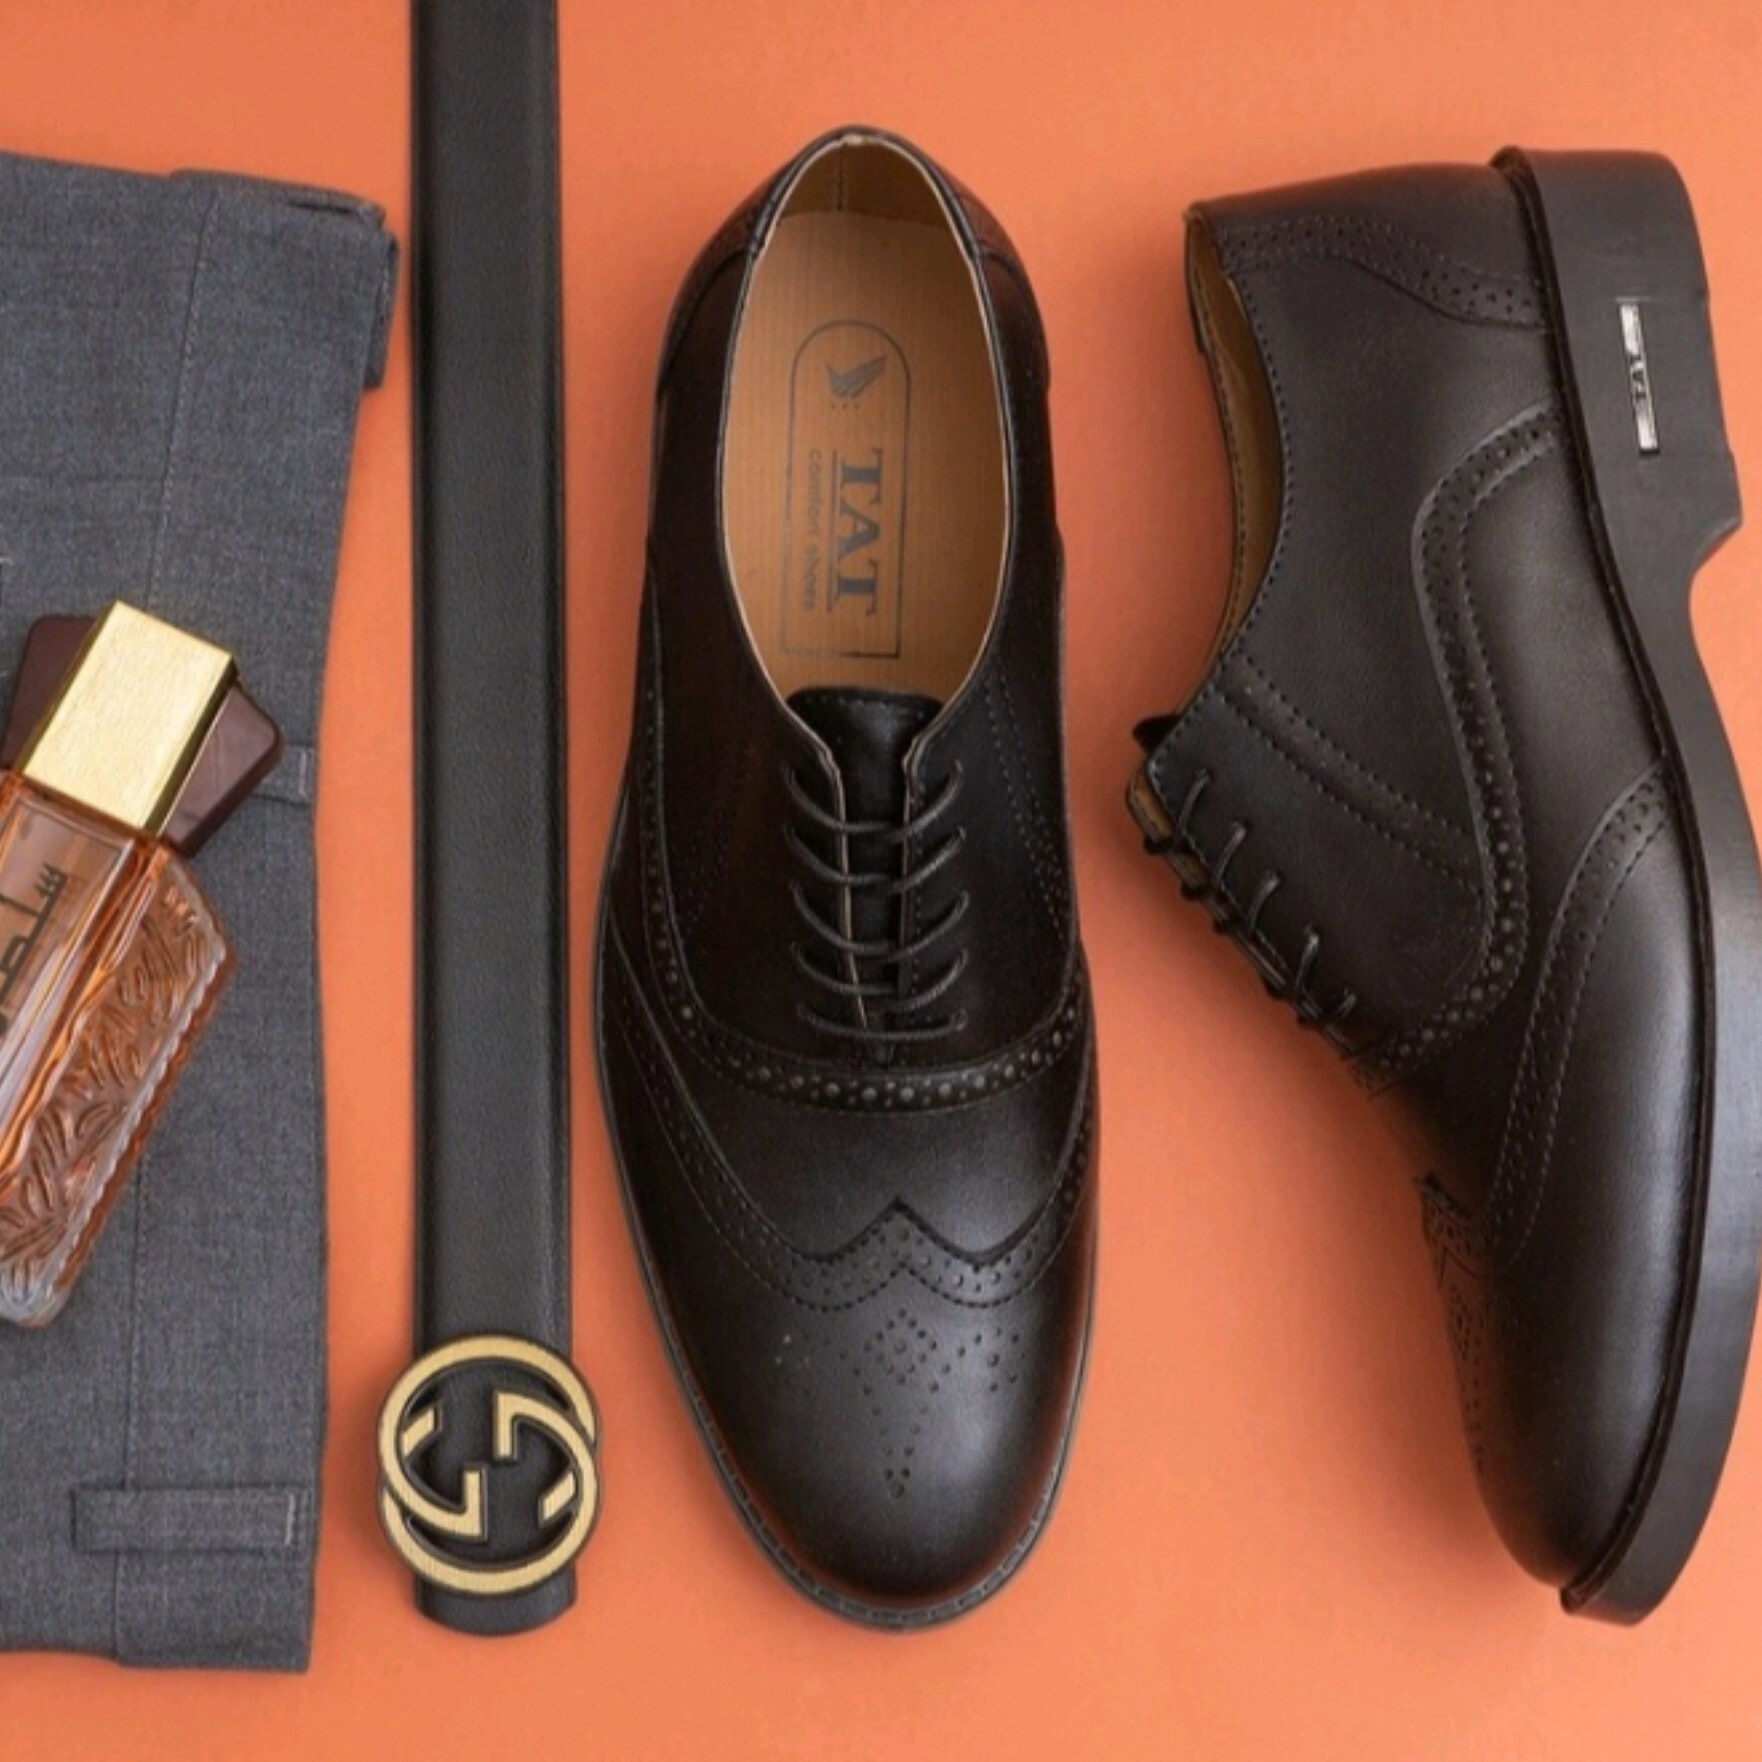 The best price to buy leather shoes brands